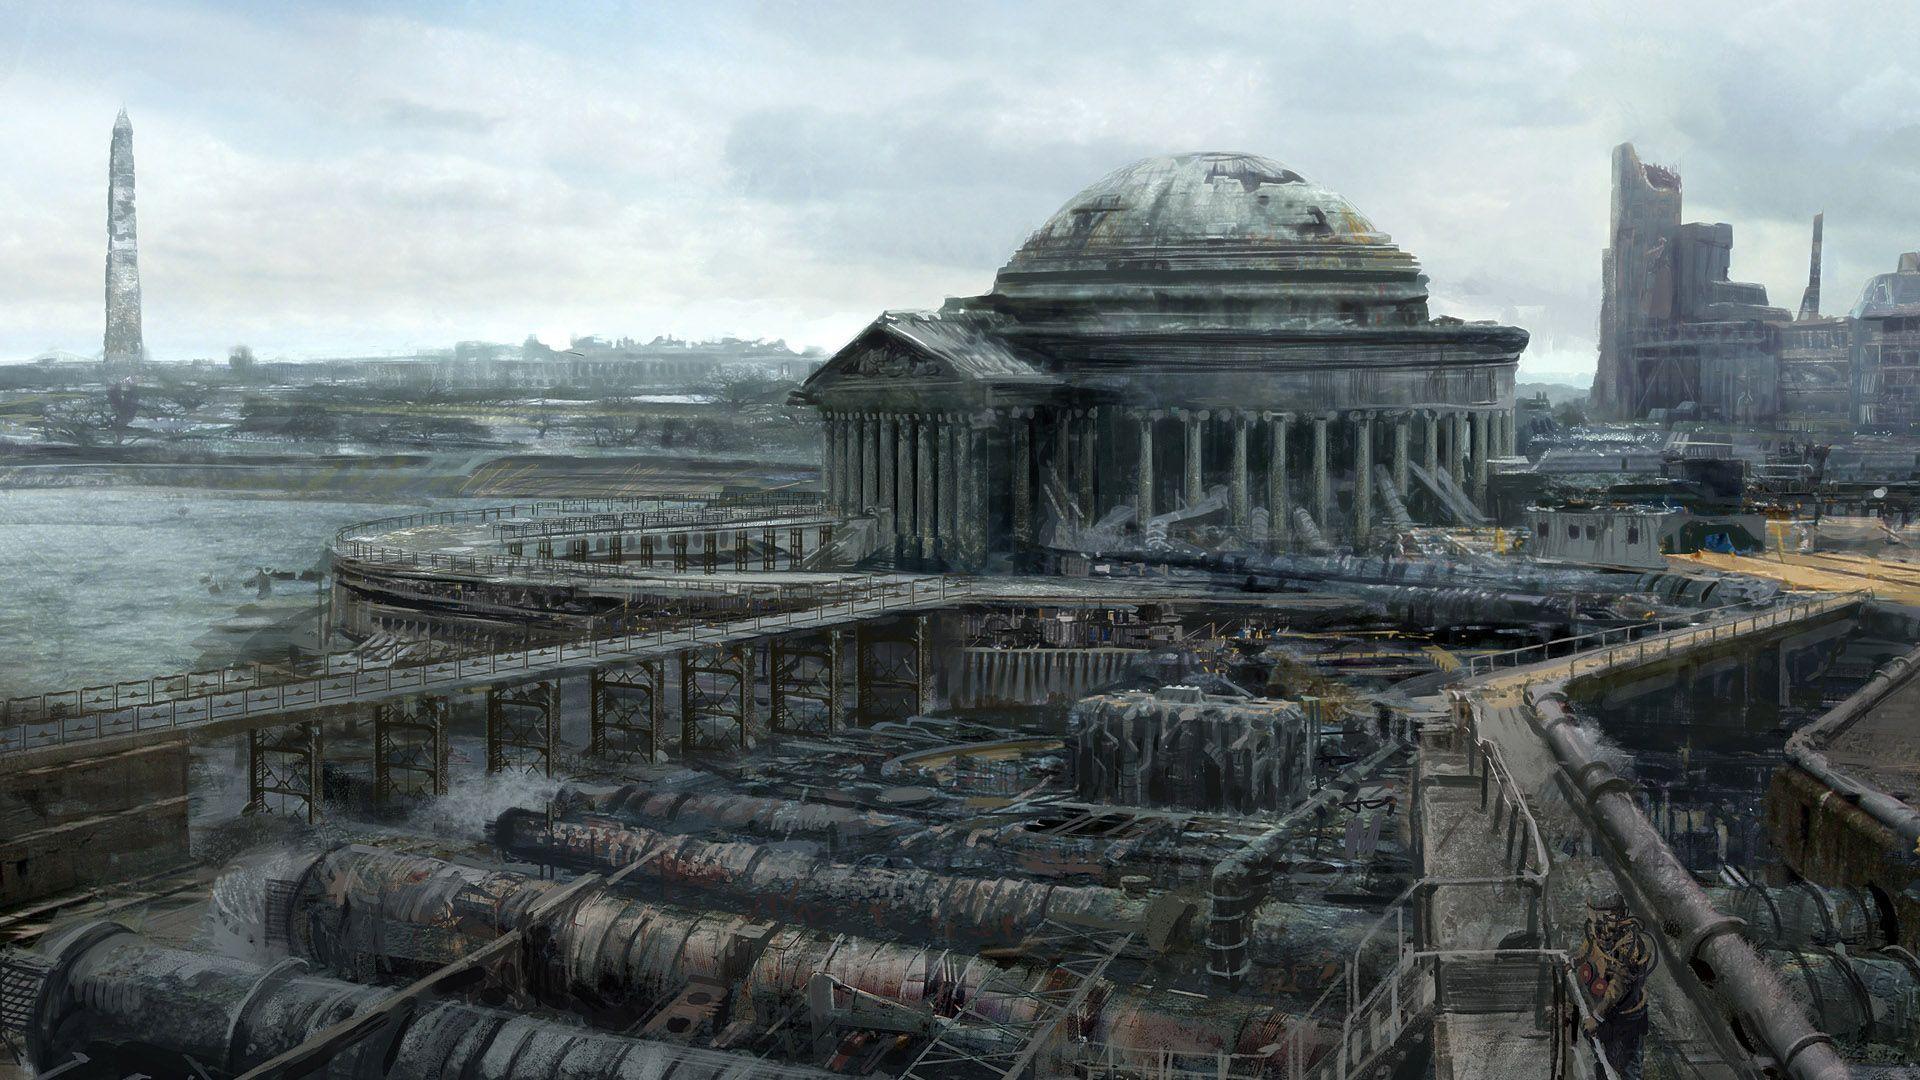 Weekly Wallpaper: Imagine The World's End With These Dystopian